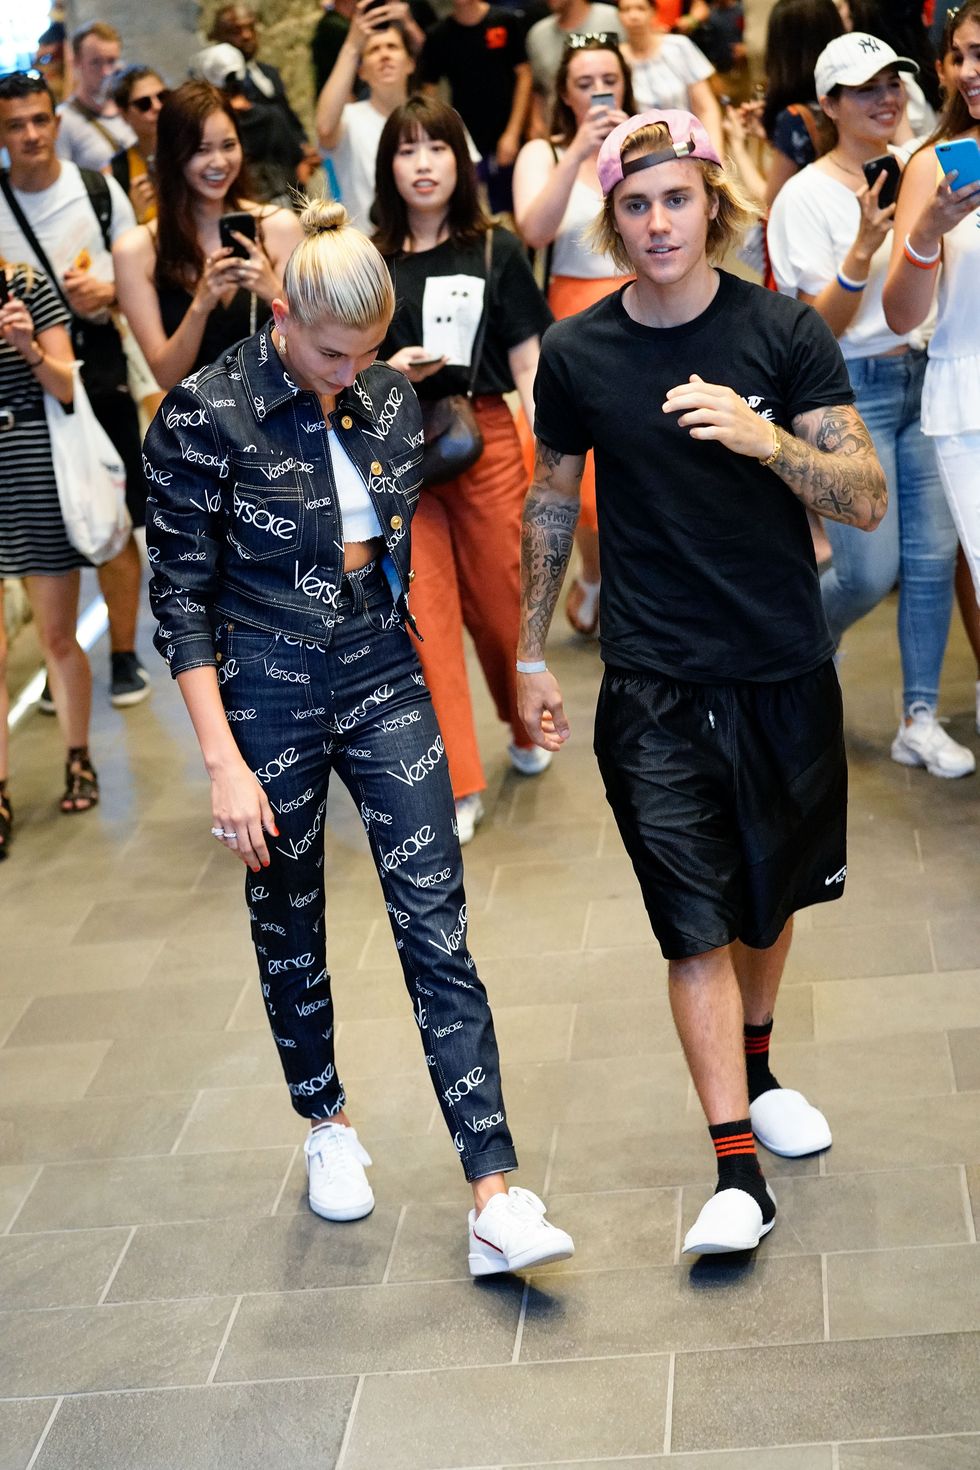 Why Is Justin Bieber Wearing Hotel Slippers Out?